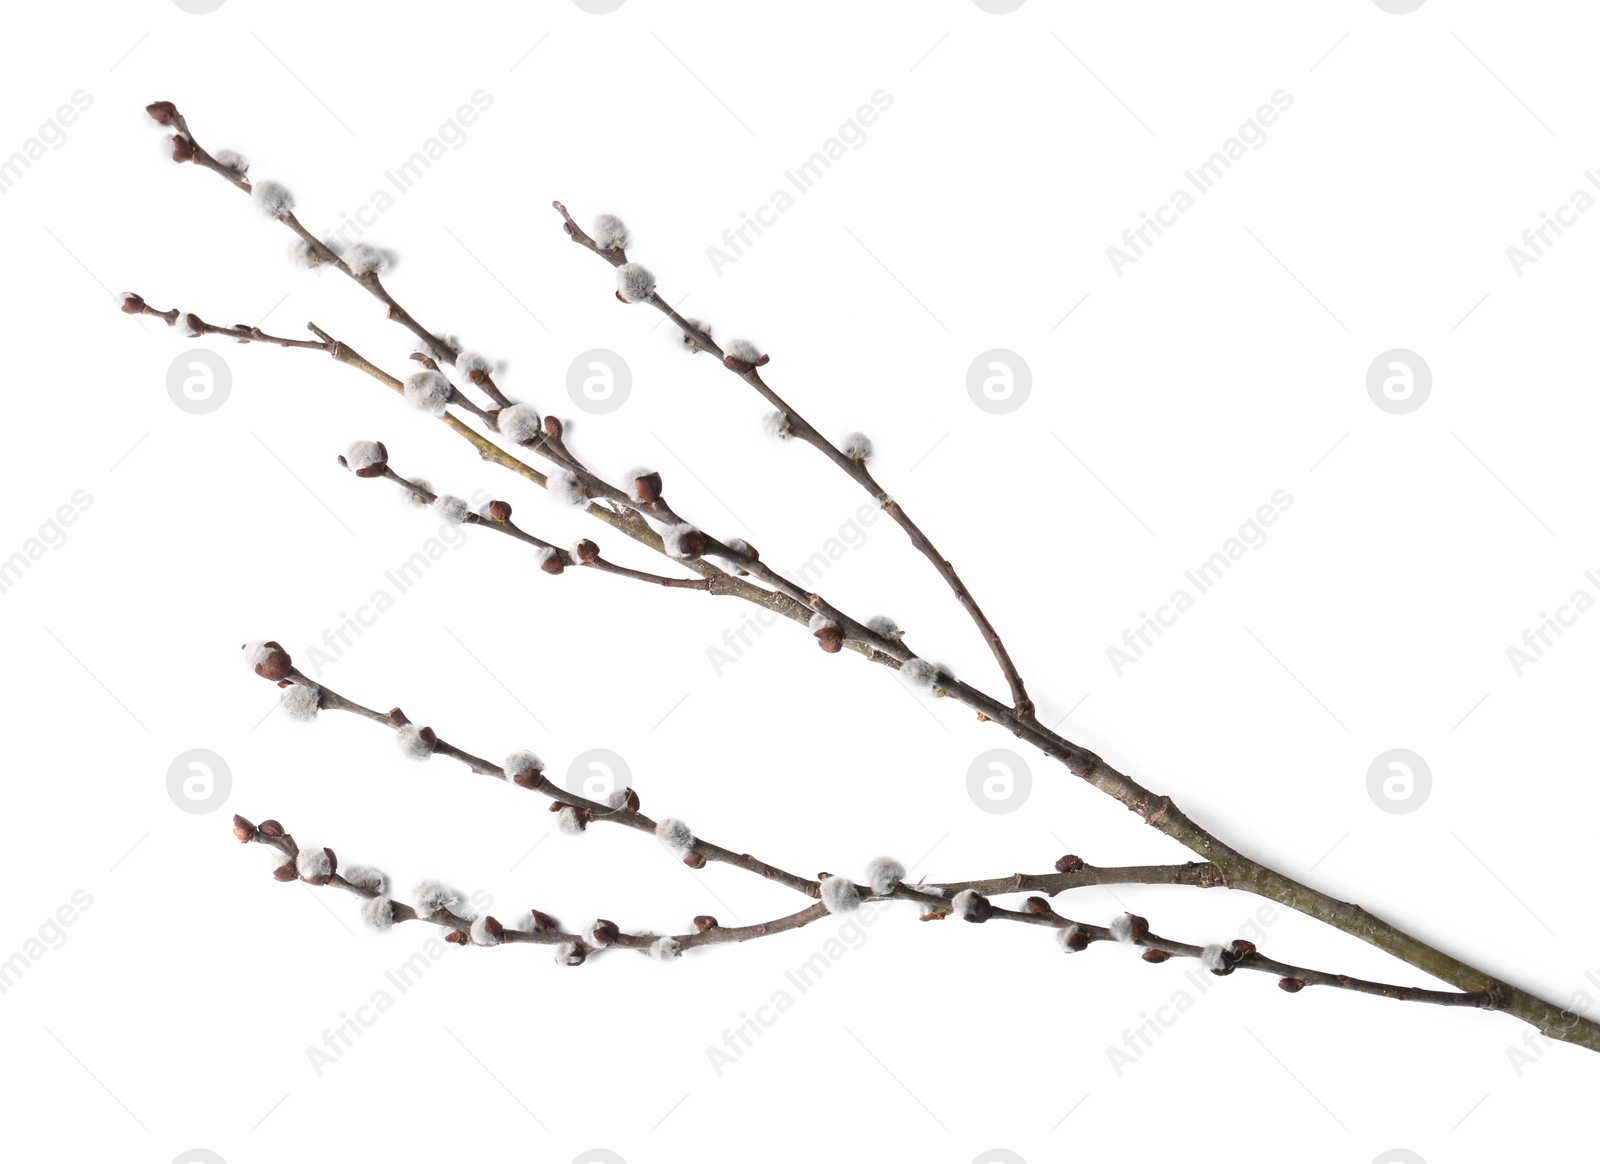 Photo of Beautiful pussy willow branch with flowering catkins isolated on white